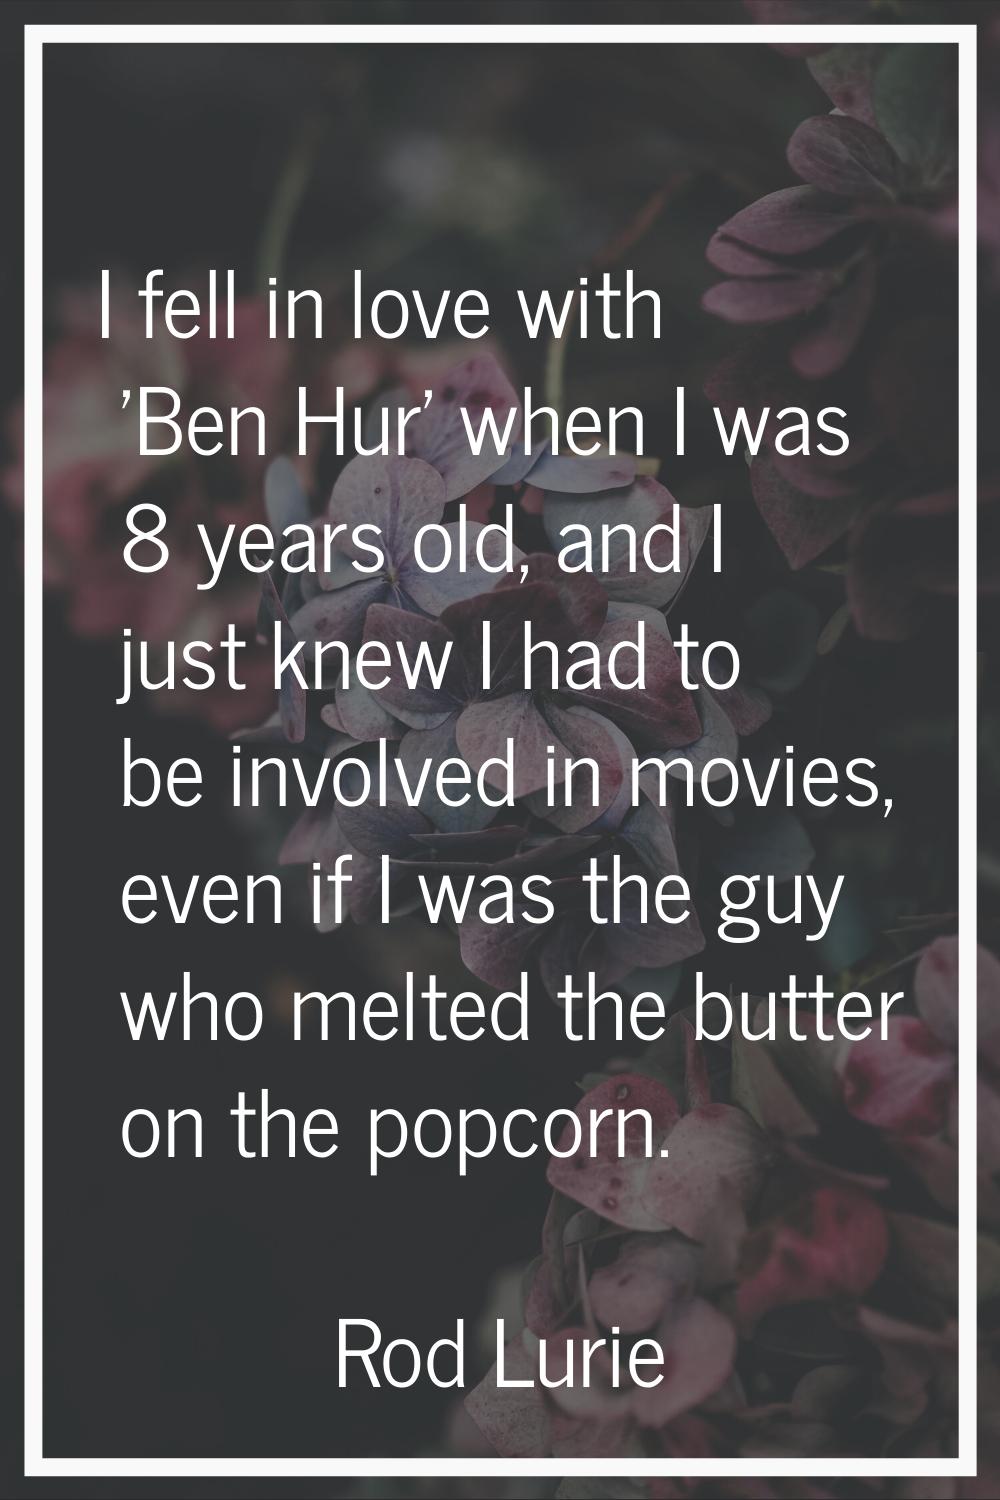 I fell in love with 'Ben Hur' when I was 8 years old, and I just knew I had to be involved in movie